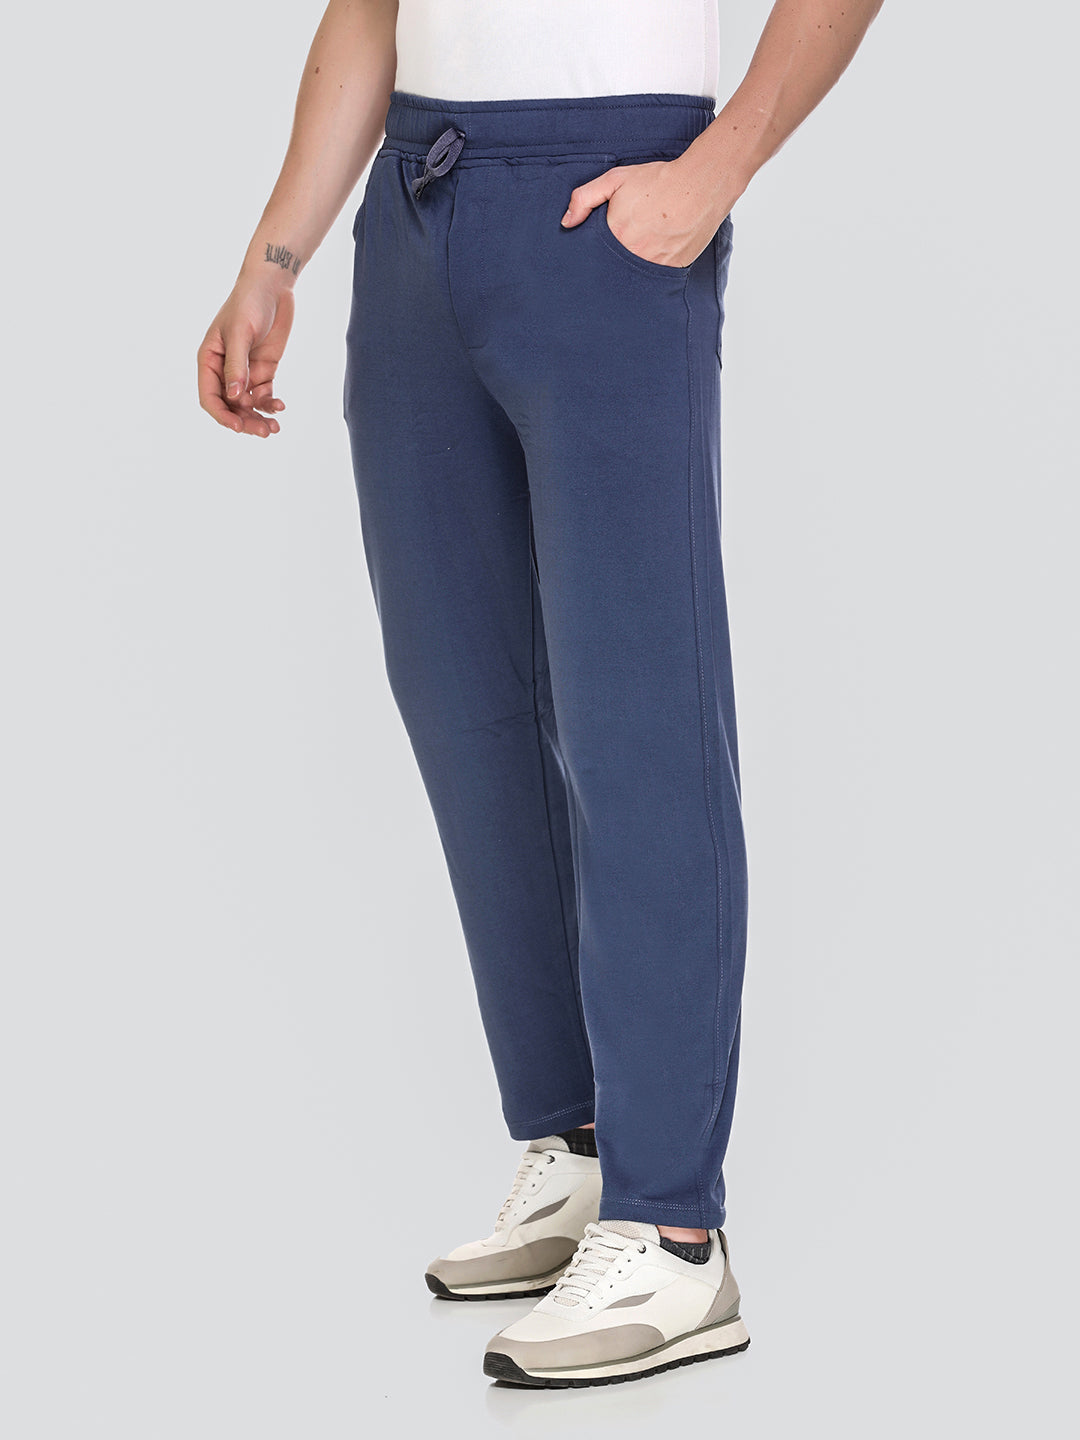 Comfy Blue Cotton Jinxer Regular Fit Sports Lowers For Men At Best Prices Online In India